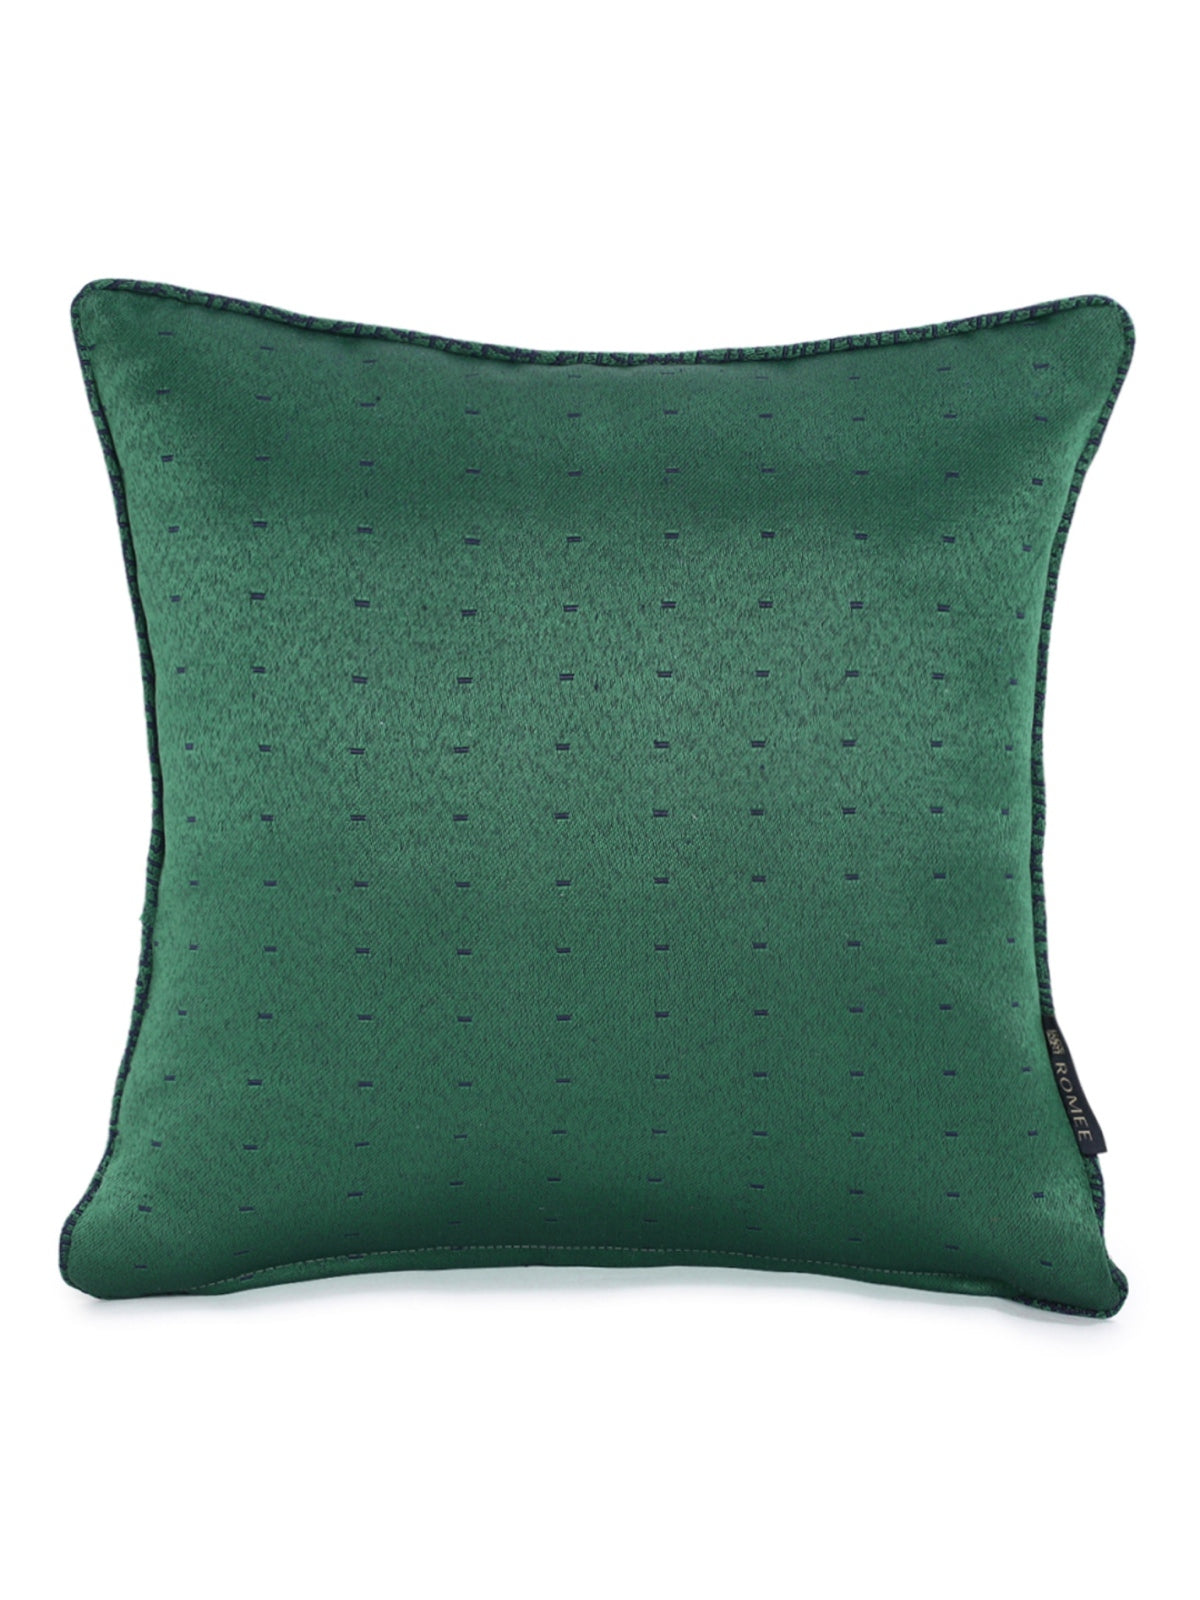 Soft Polyester Textured Designer Plain Cushion Covers 16 inch x 16 inch Set of 5 - Green